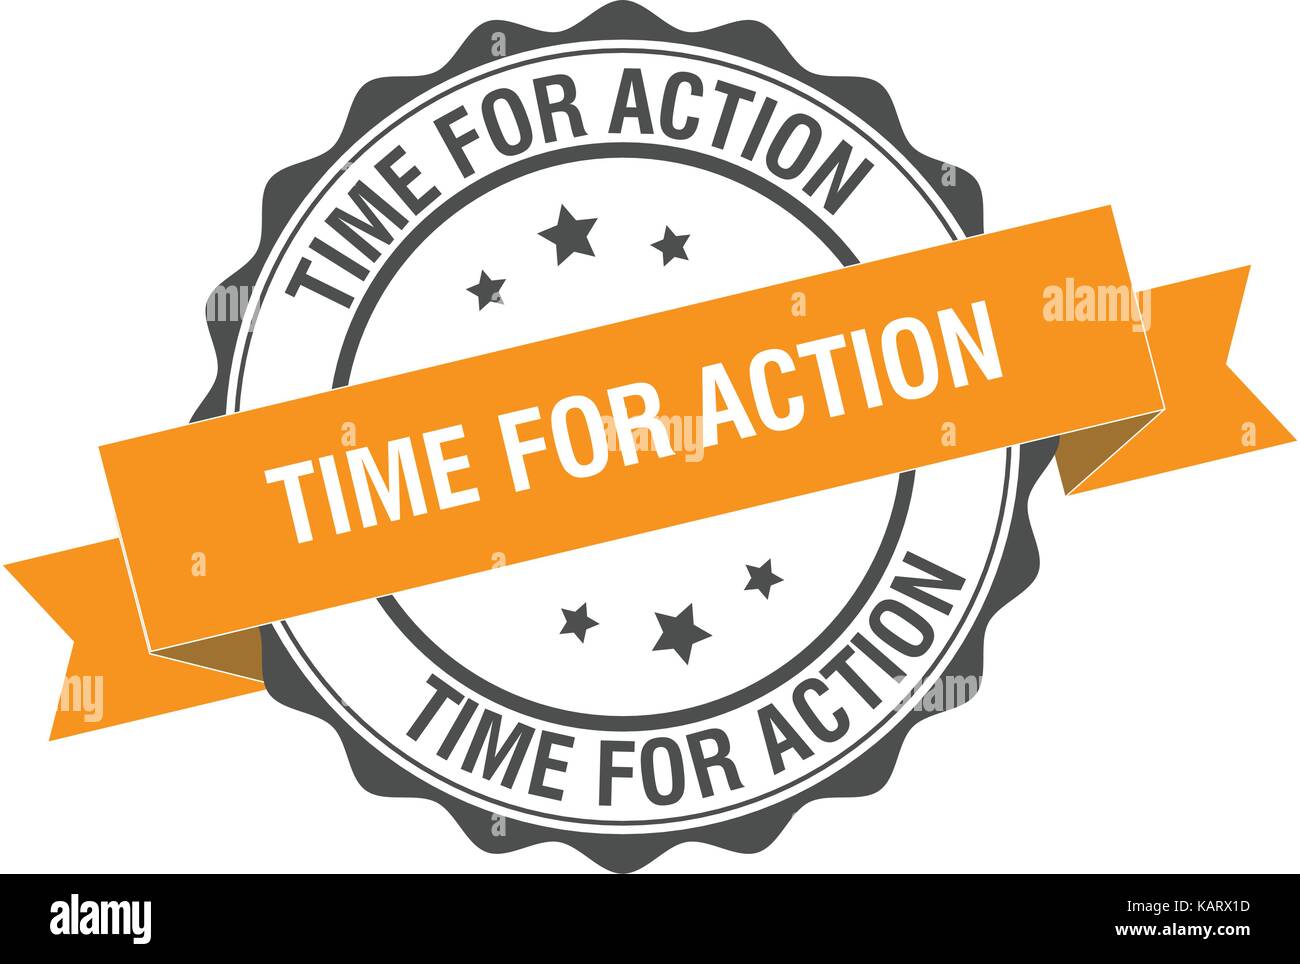 Time for action stamp illustration Stock Vector